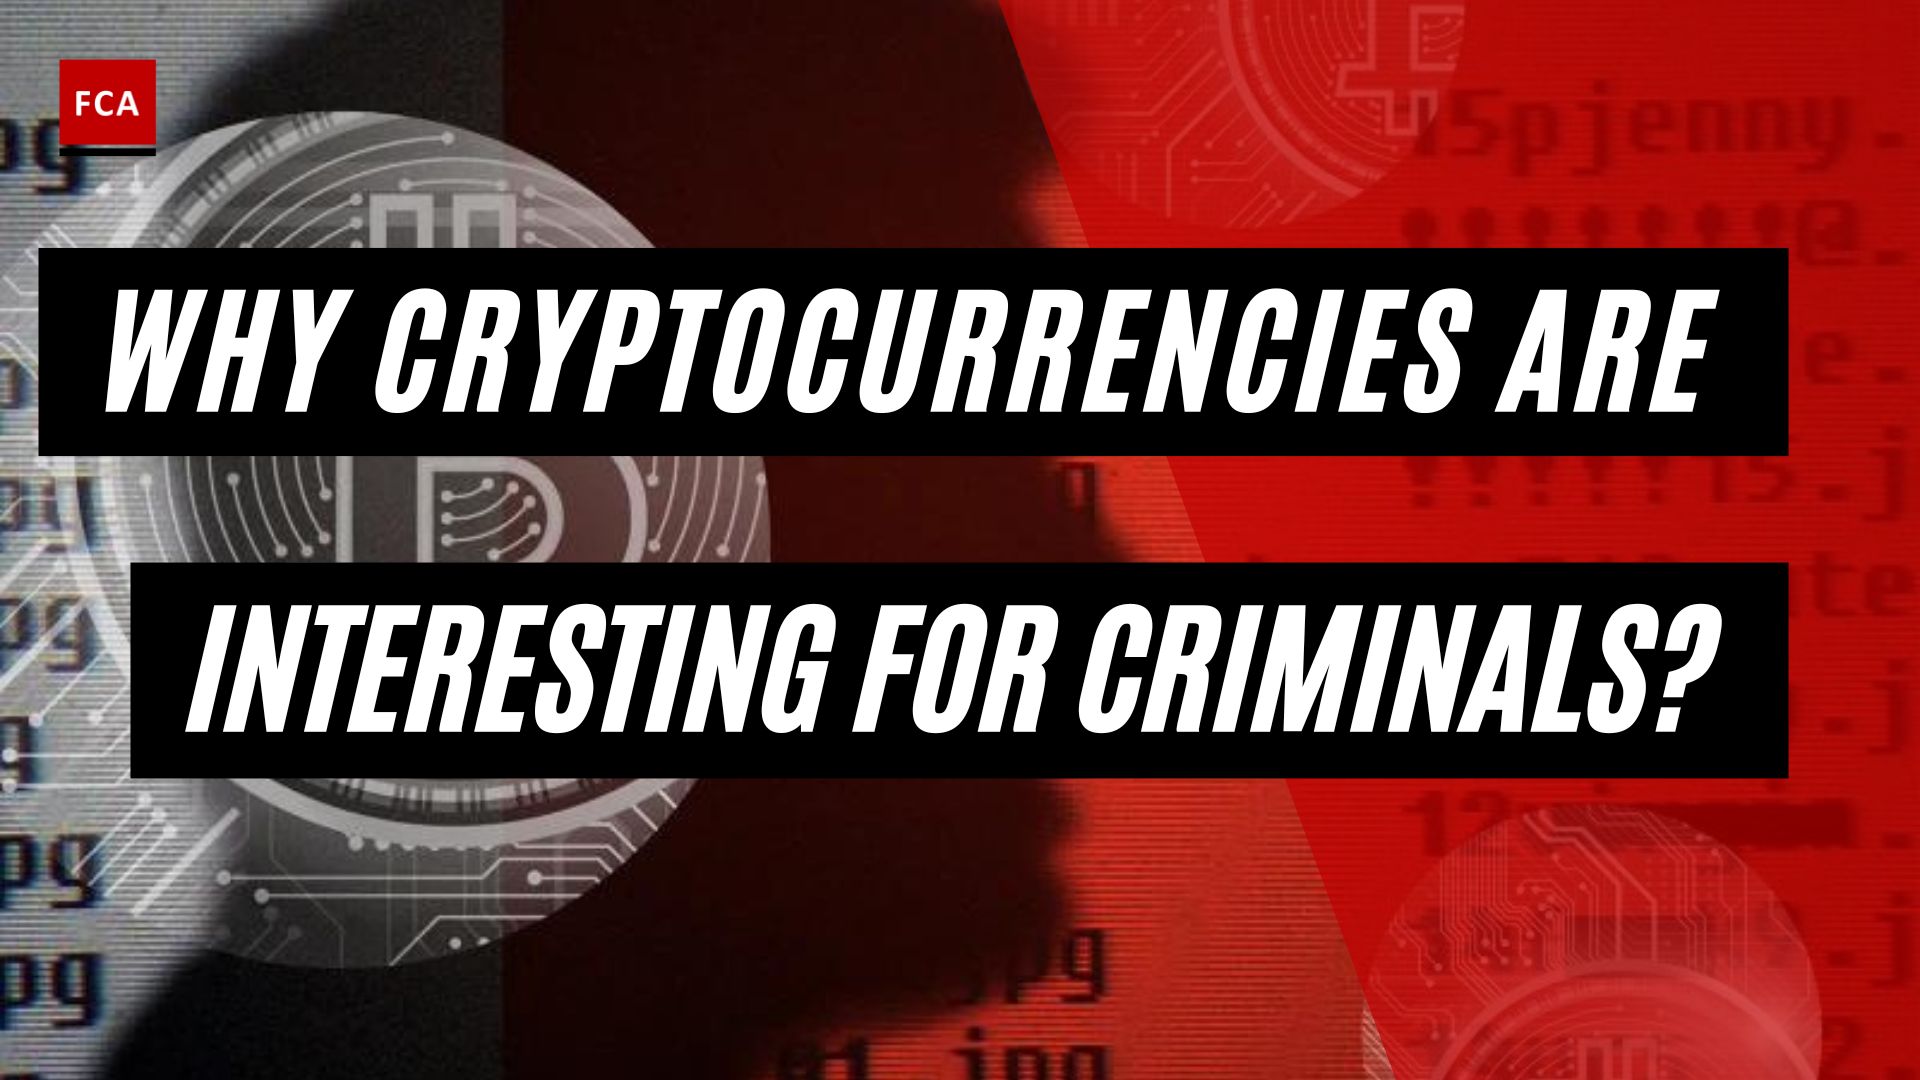 Why Cryptocurrencies Are Interesting For Criminals